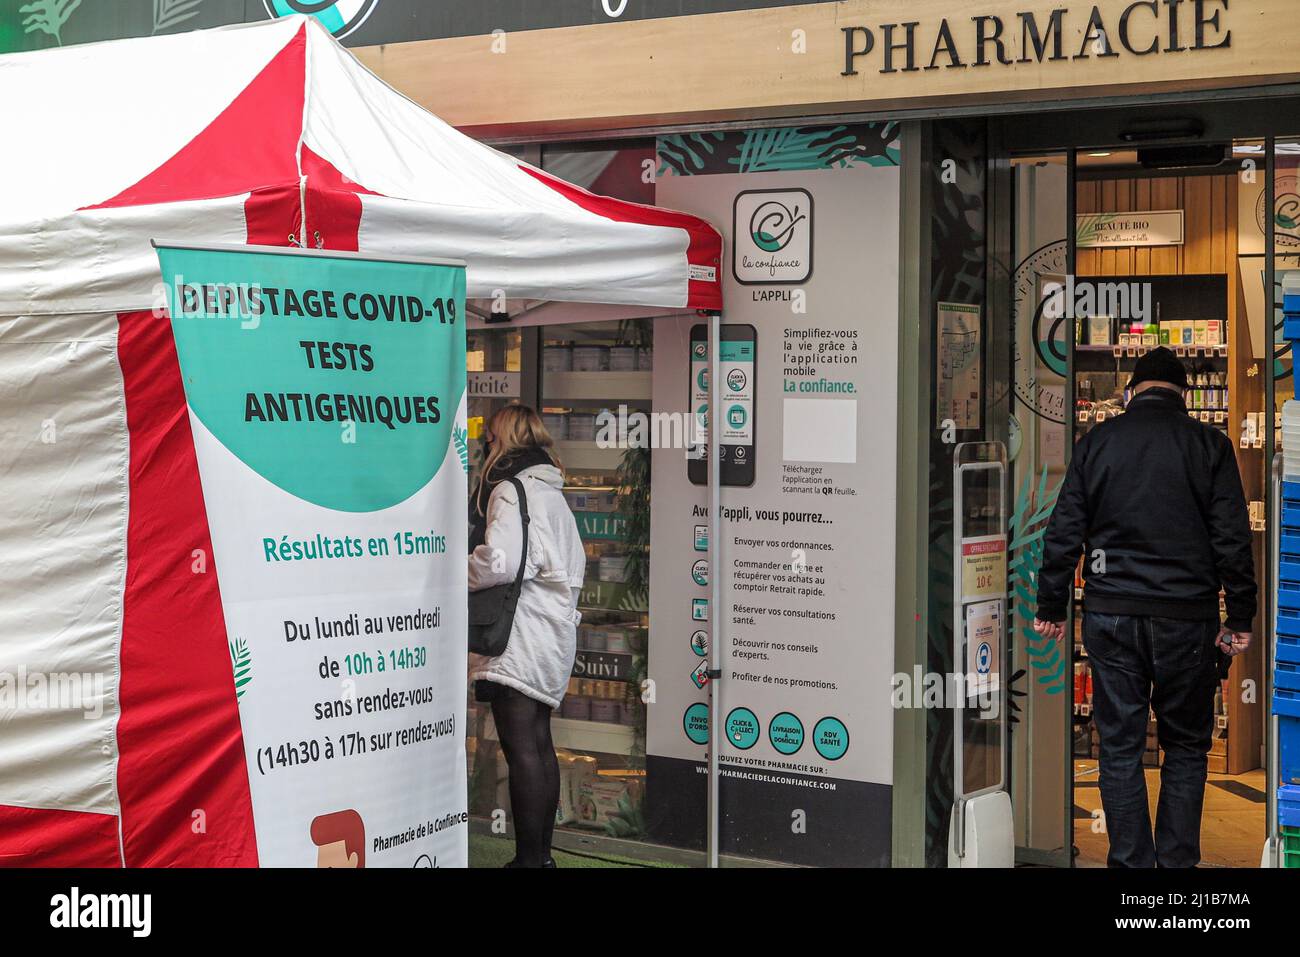 COVID 19 TESTING CENTER IN FRONT OF A PHARMACY, PARIS 9TH ARRONDISSEMENT, FRANCE Stock Photo